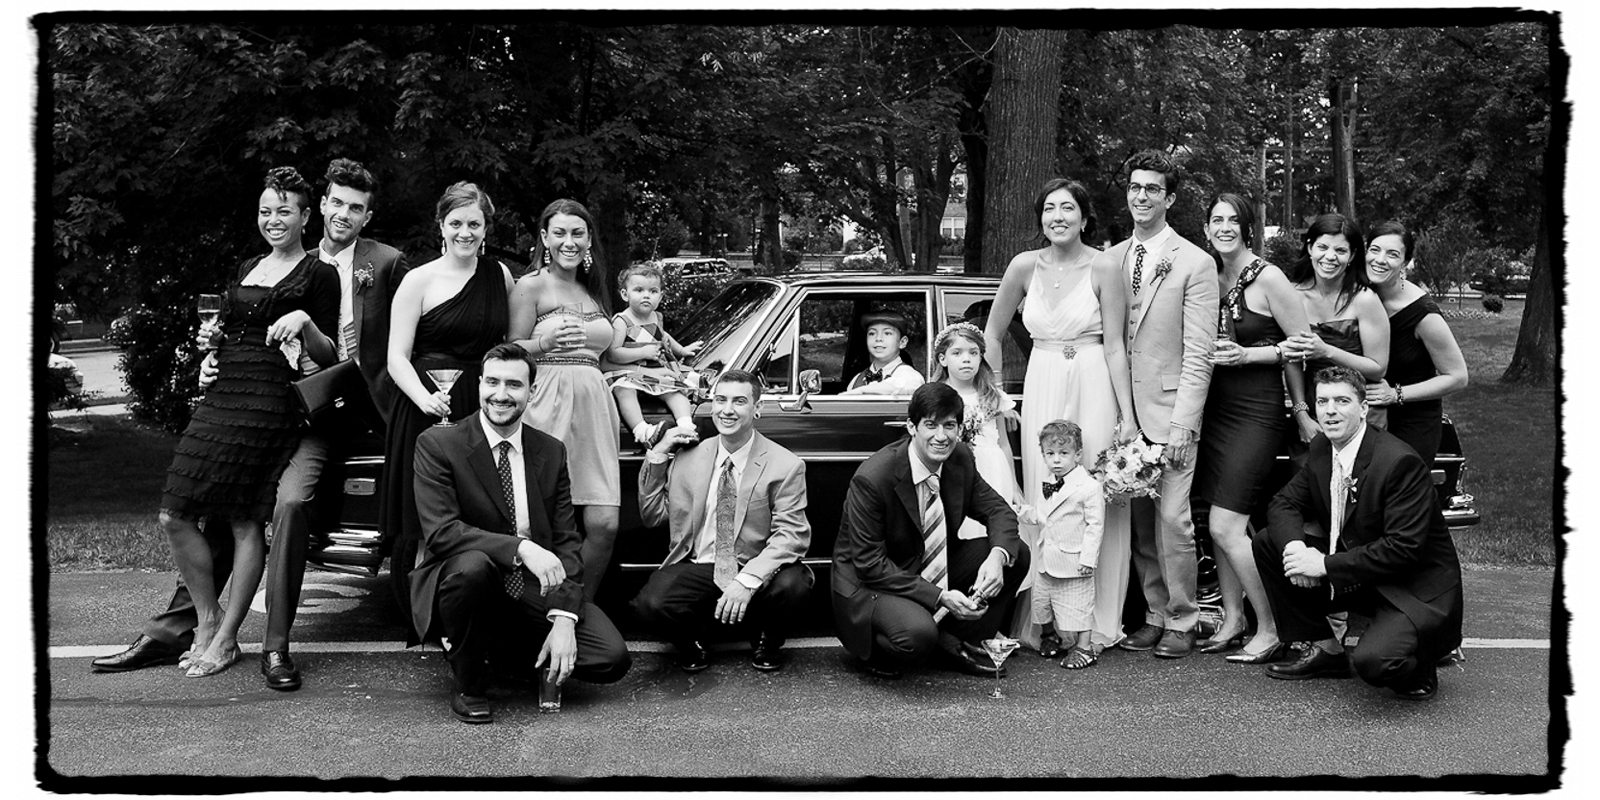 Grandpa's vintage Mercedes made a perfect backdrop for this bridal party.